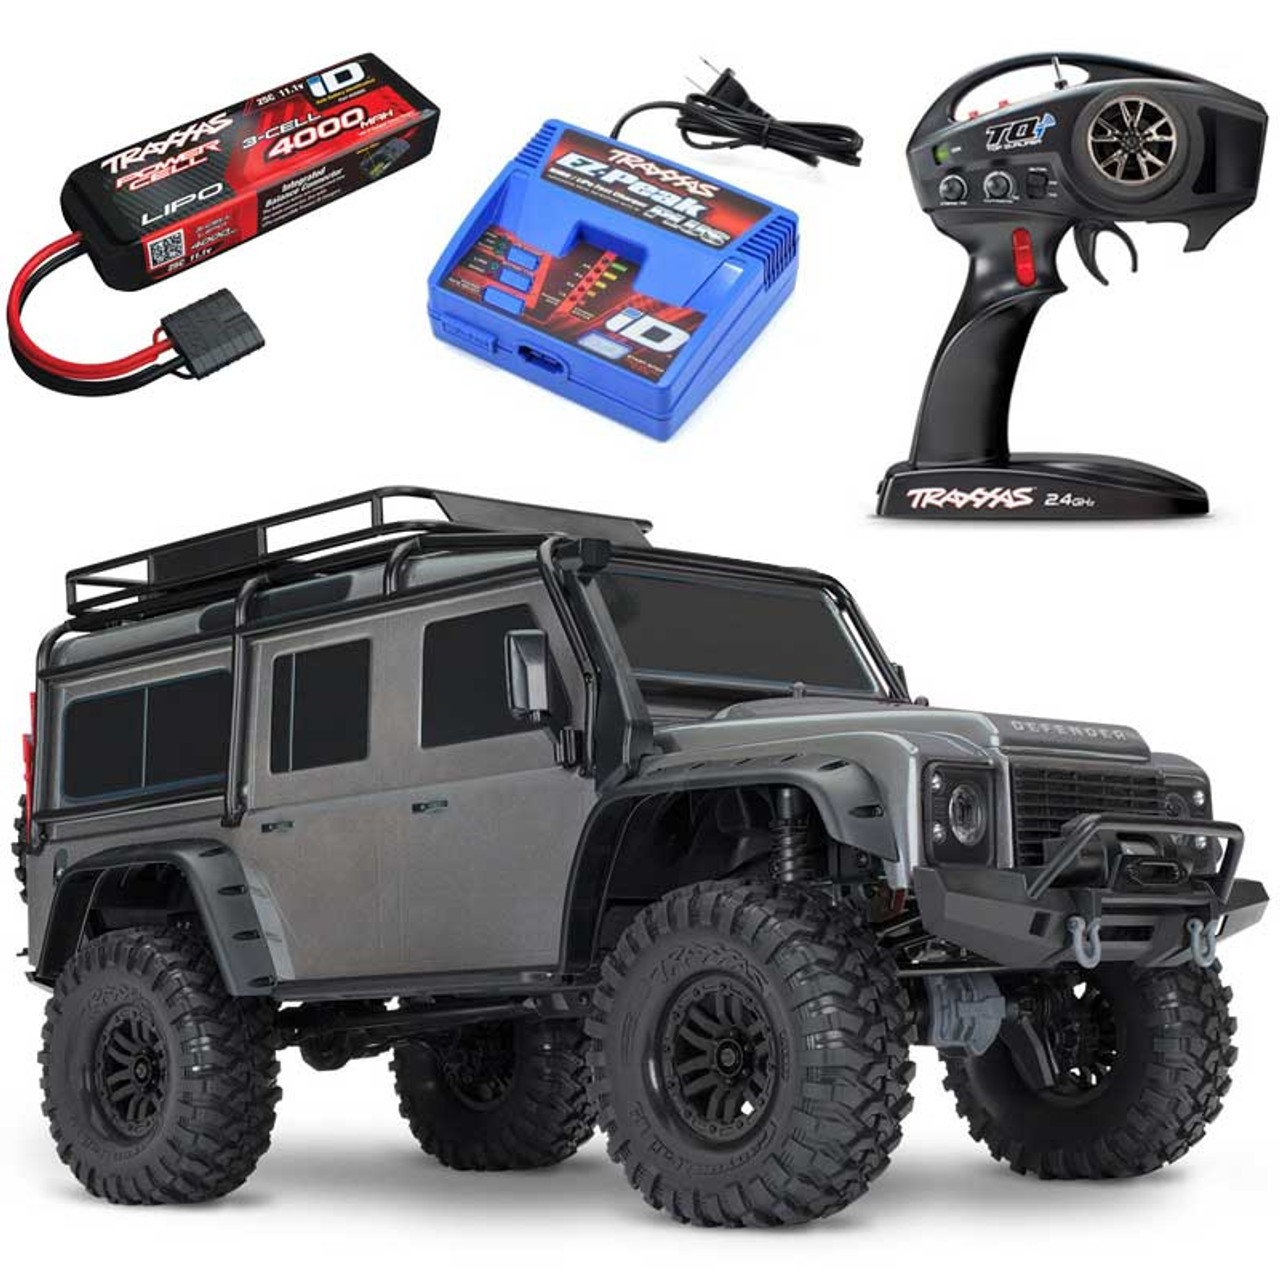 TRX4M Light Controller with Remote Headlight Control